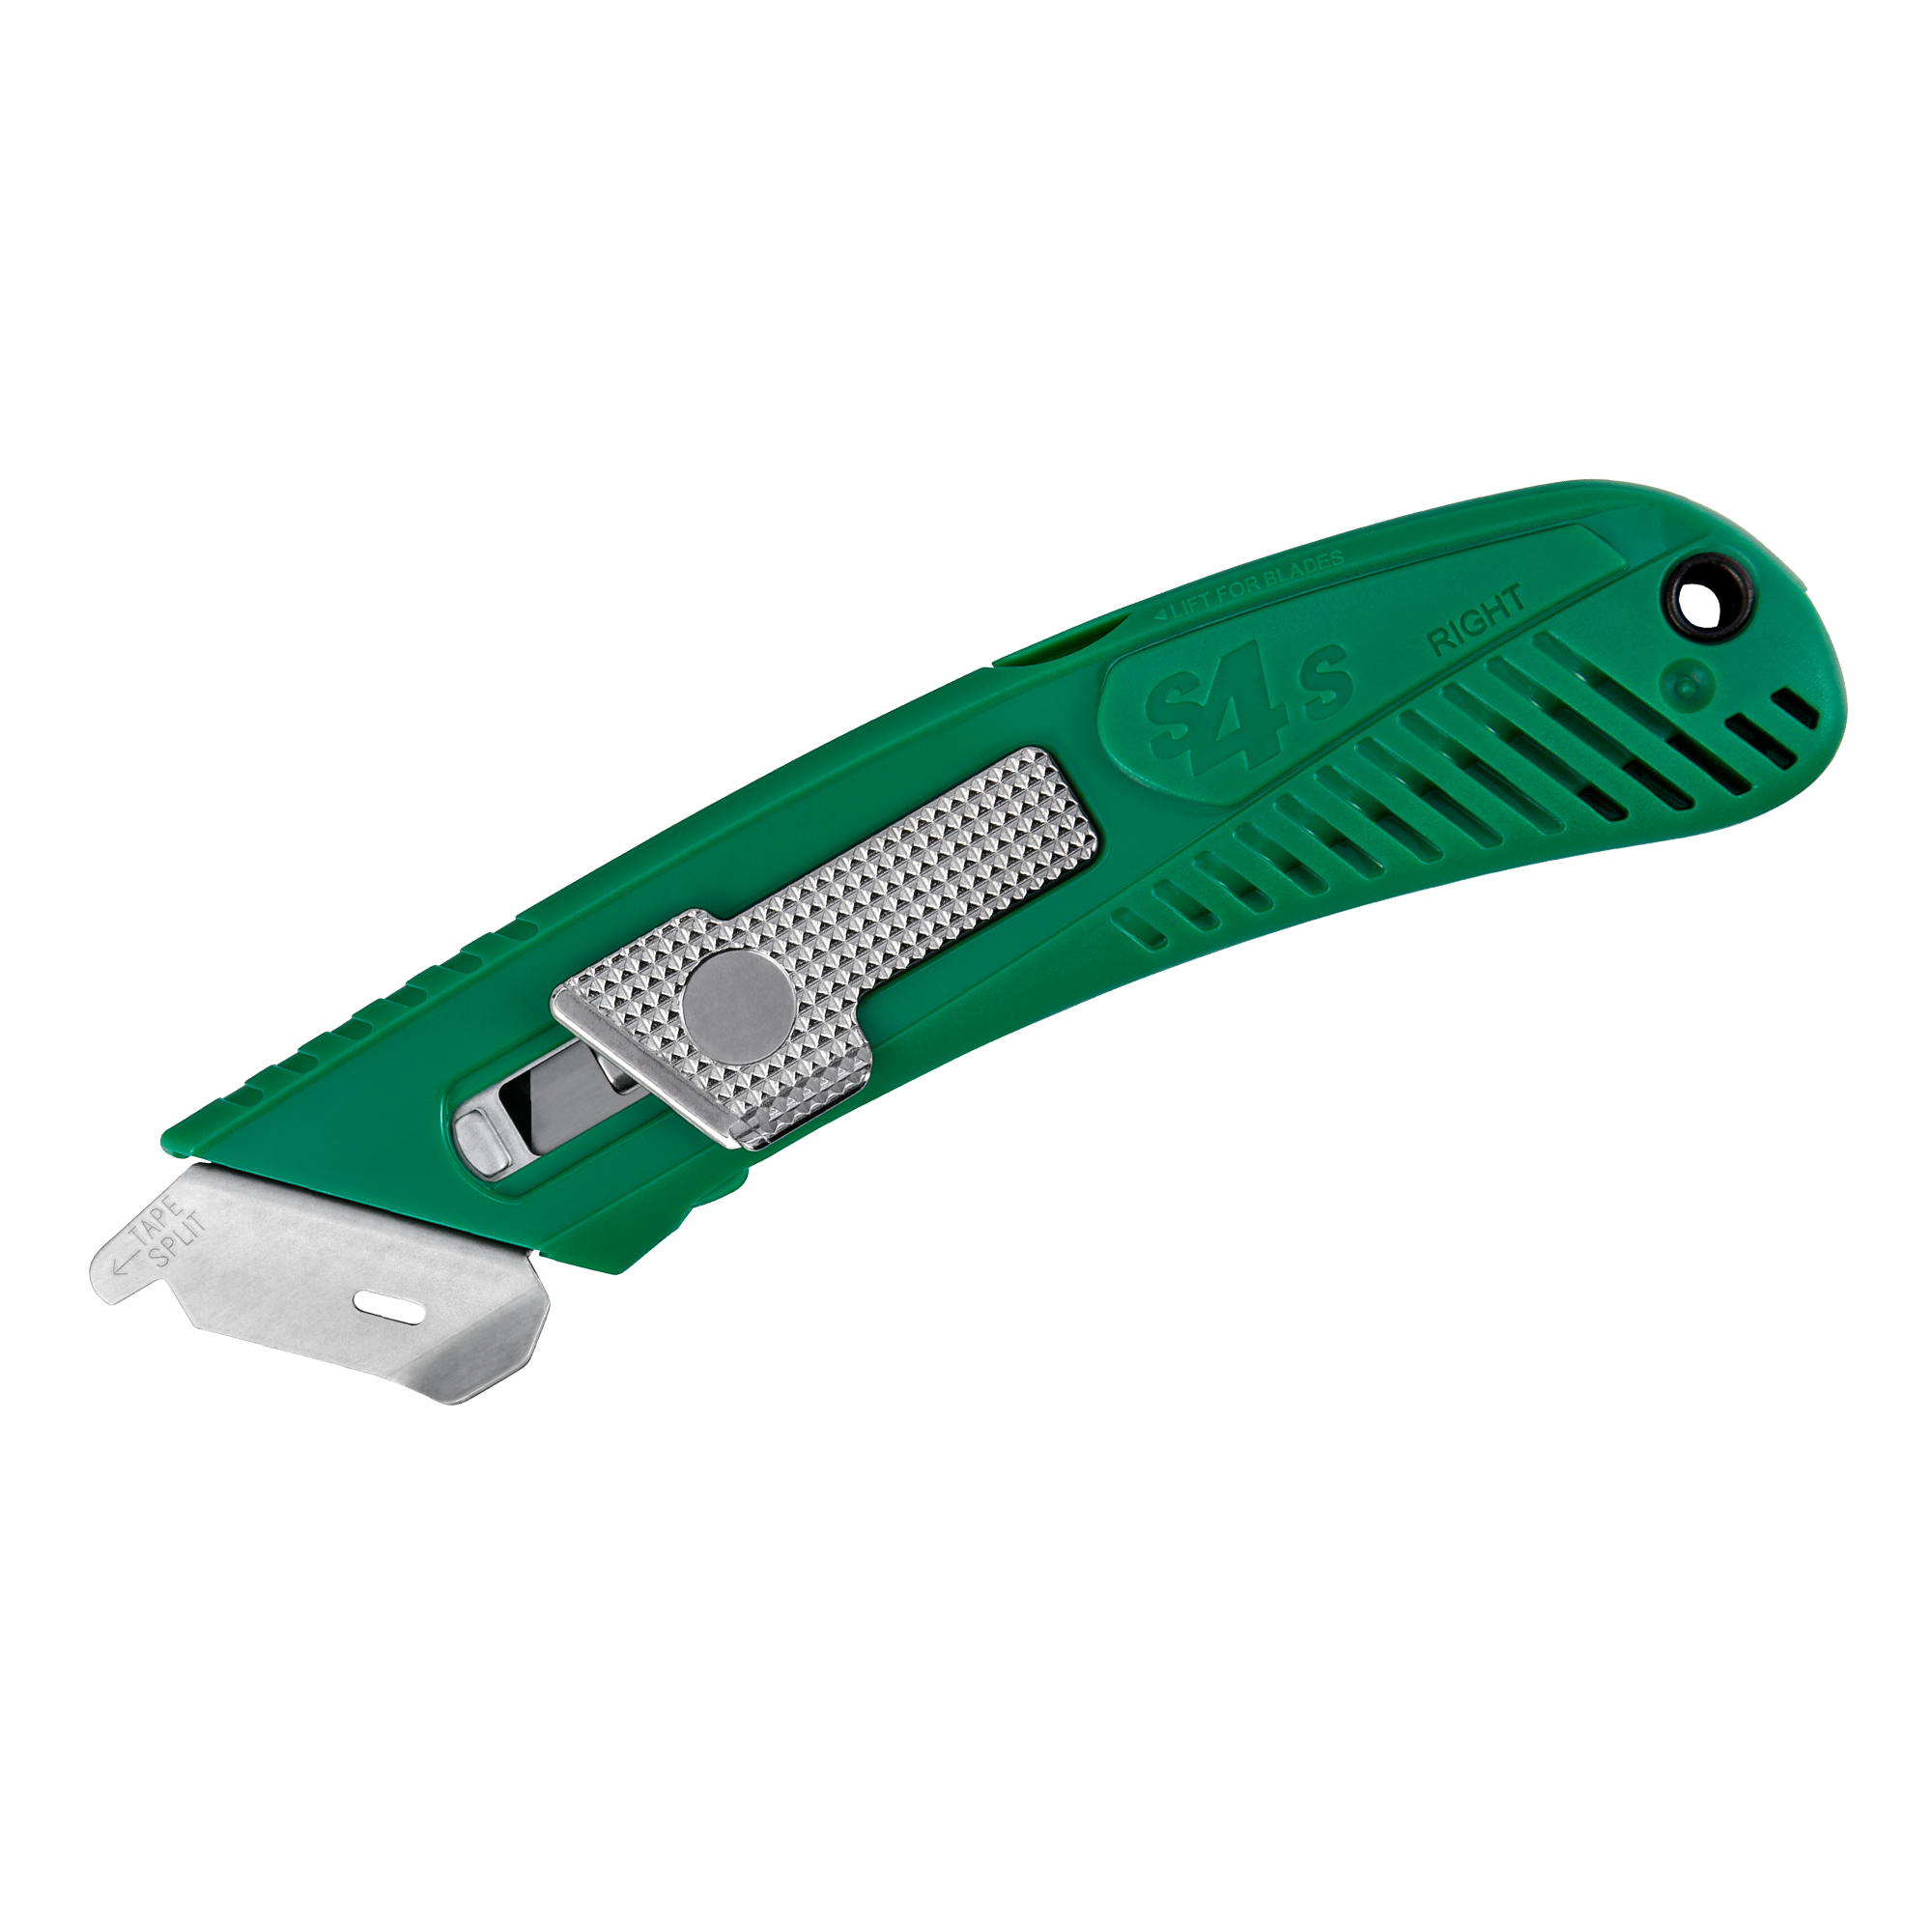 Pacific Handy Green Plastic Cutter Left Handed S4 Safety Cutter Kit